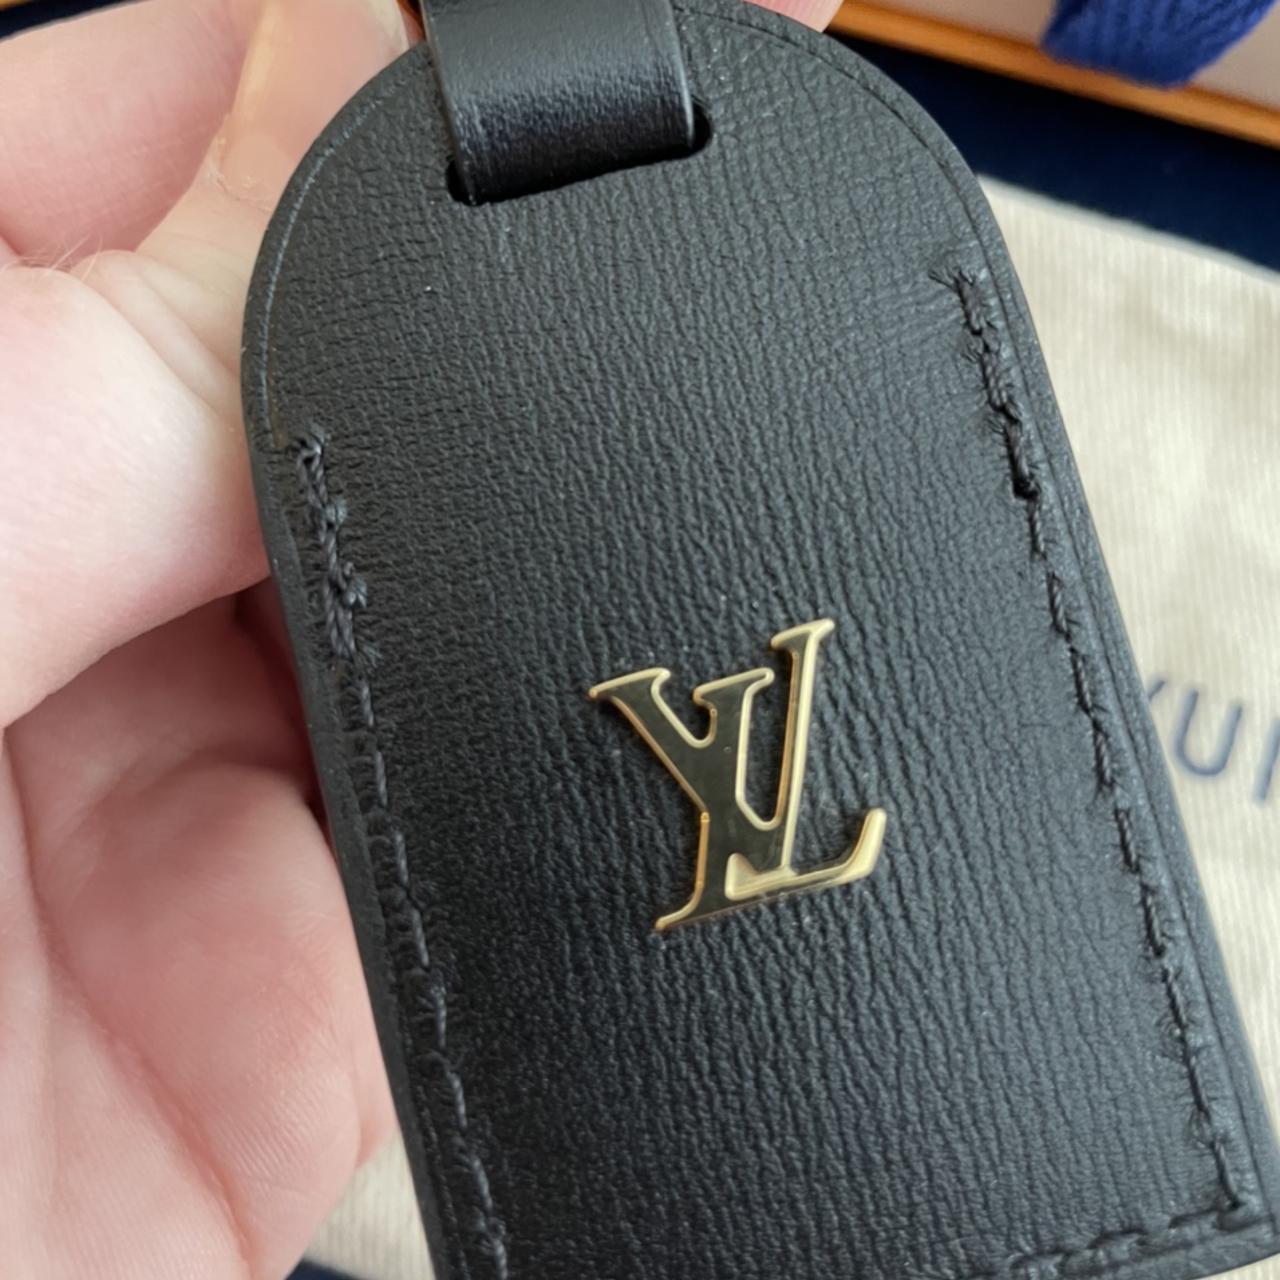 Authentic Louis Vuitton luggage tag with strap - Depop